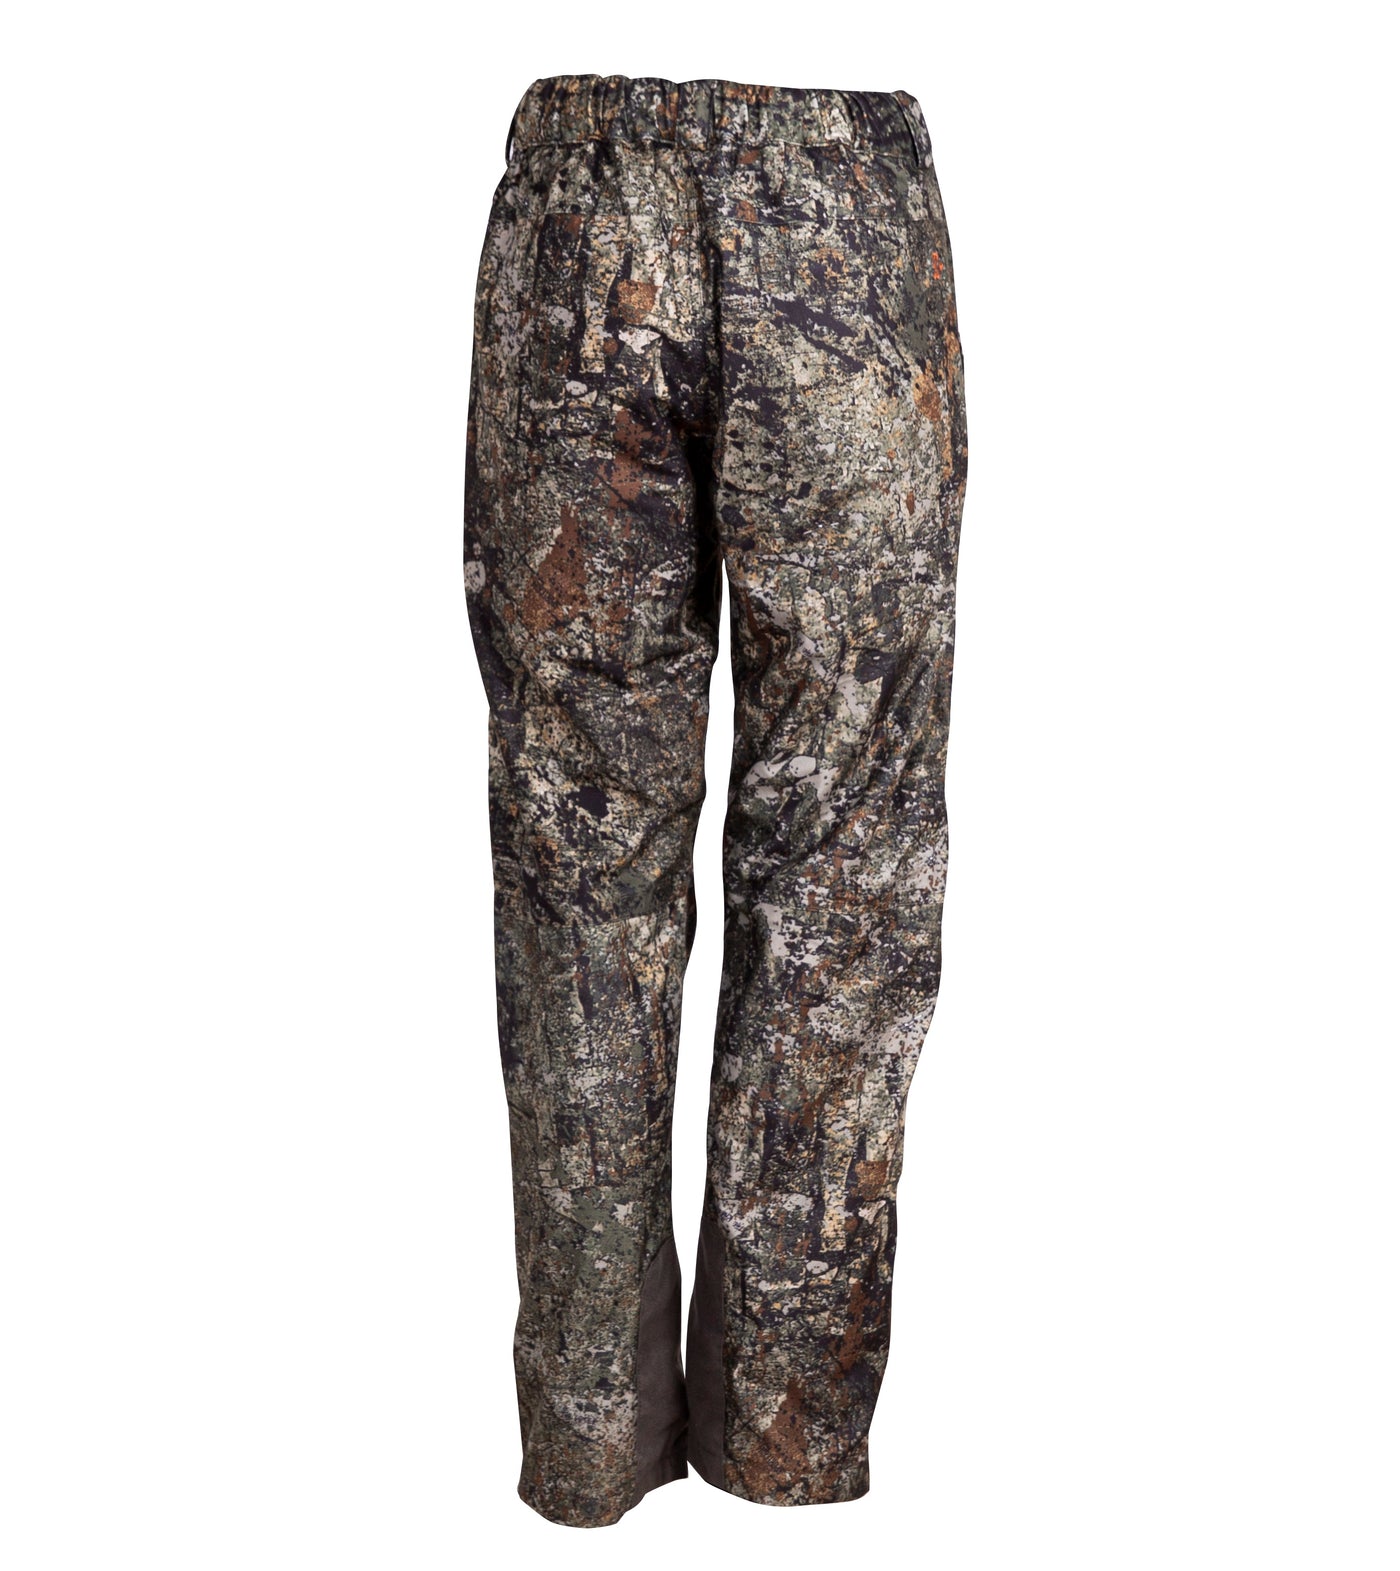 Sportchief Women's "Express 2.0" Hunting Pants